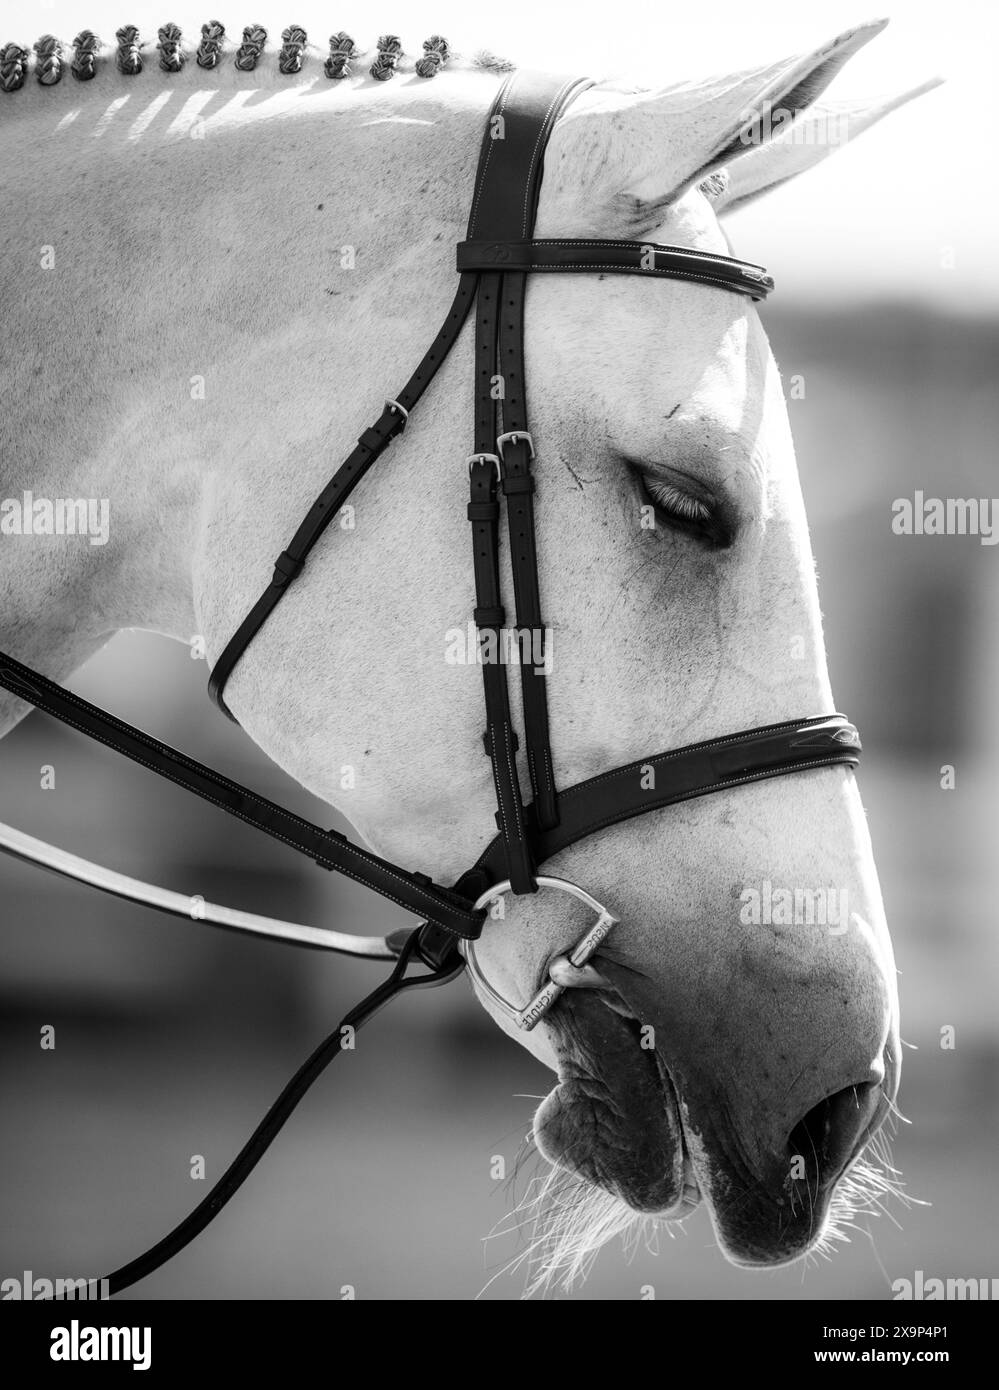 A grey horse has been bathed, braided, tacked up and ready to compete in an Equestrian Show Jumping event in Canada. Stock Photo